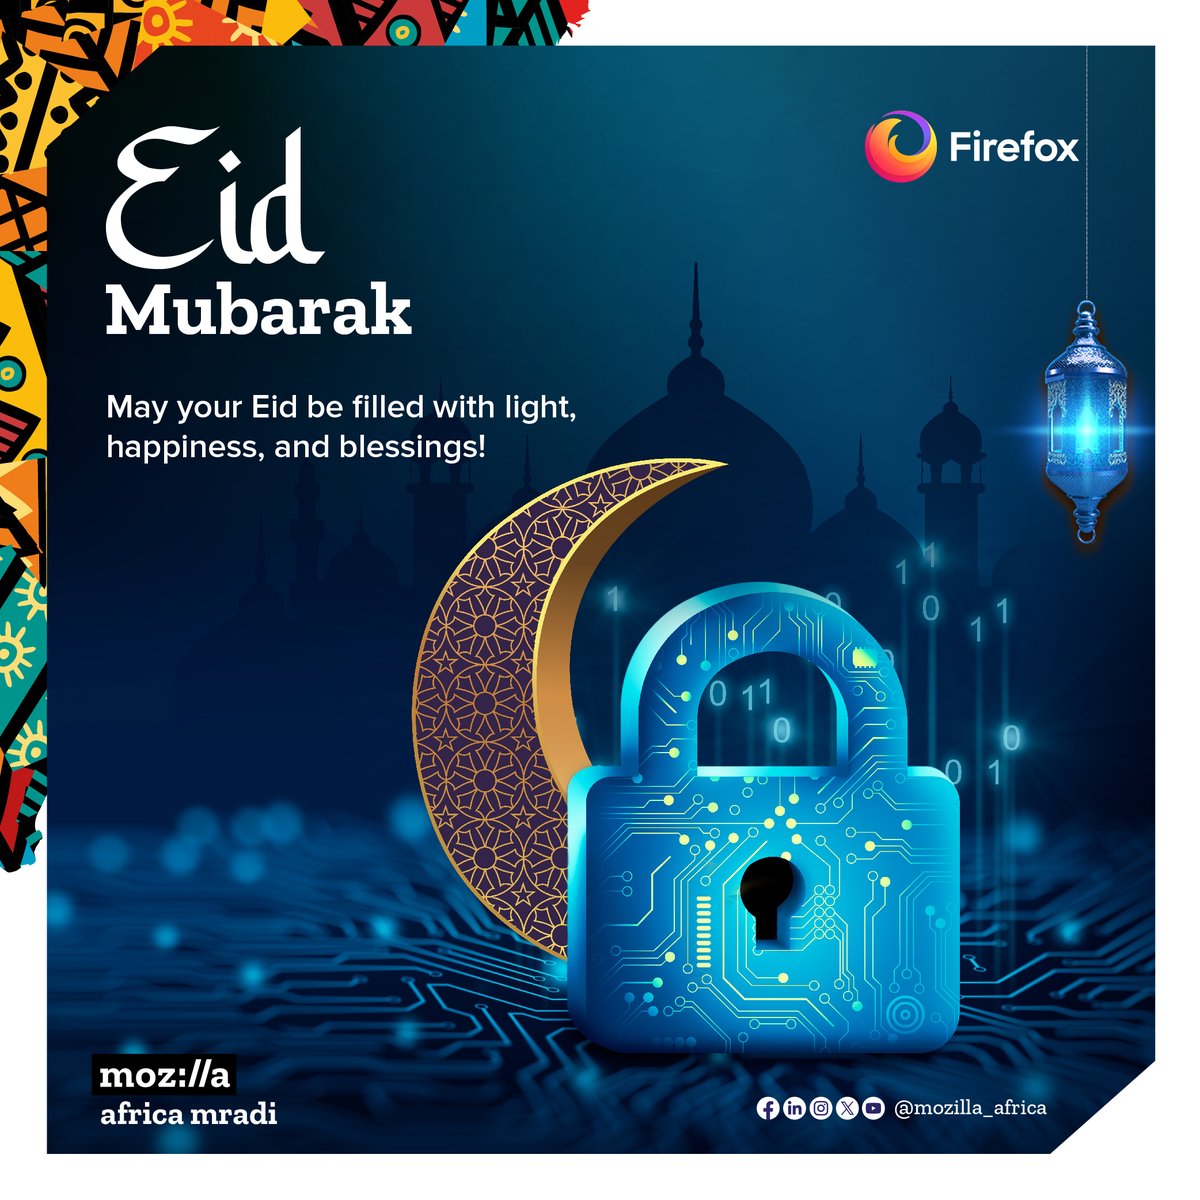 May this Eid bring you and your loved ones light, happiness, and countless blessings. May your homes be filled with laughter, delicious meals, and cherished moments of togetherness.

#EidMubarak #Eid #MozillaAfricaMradi